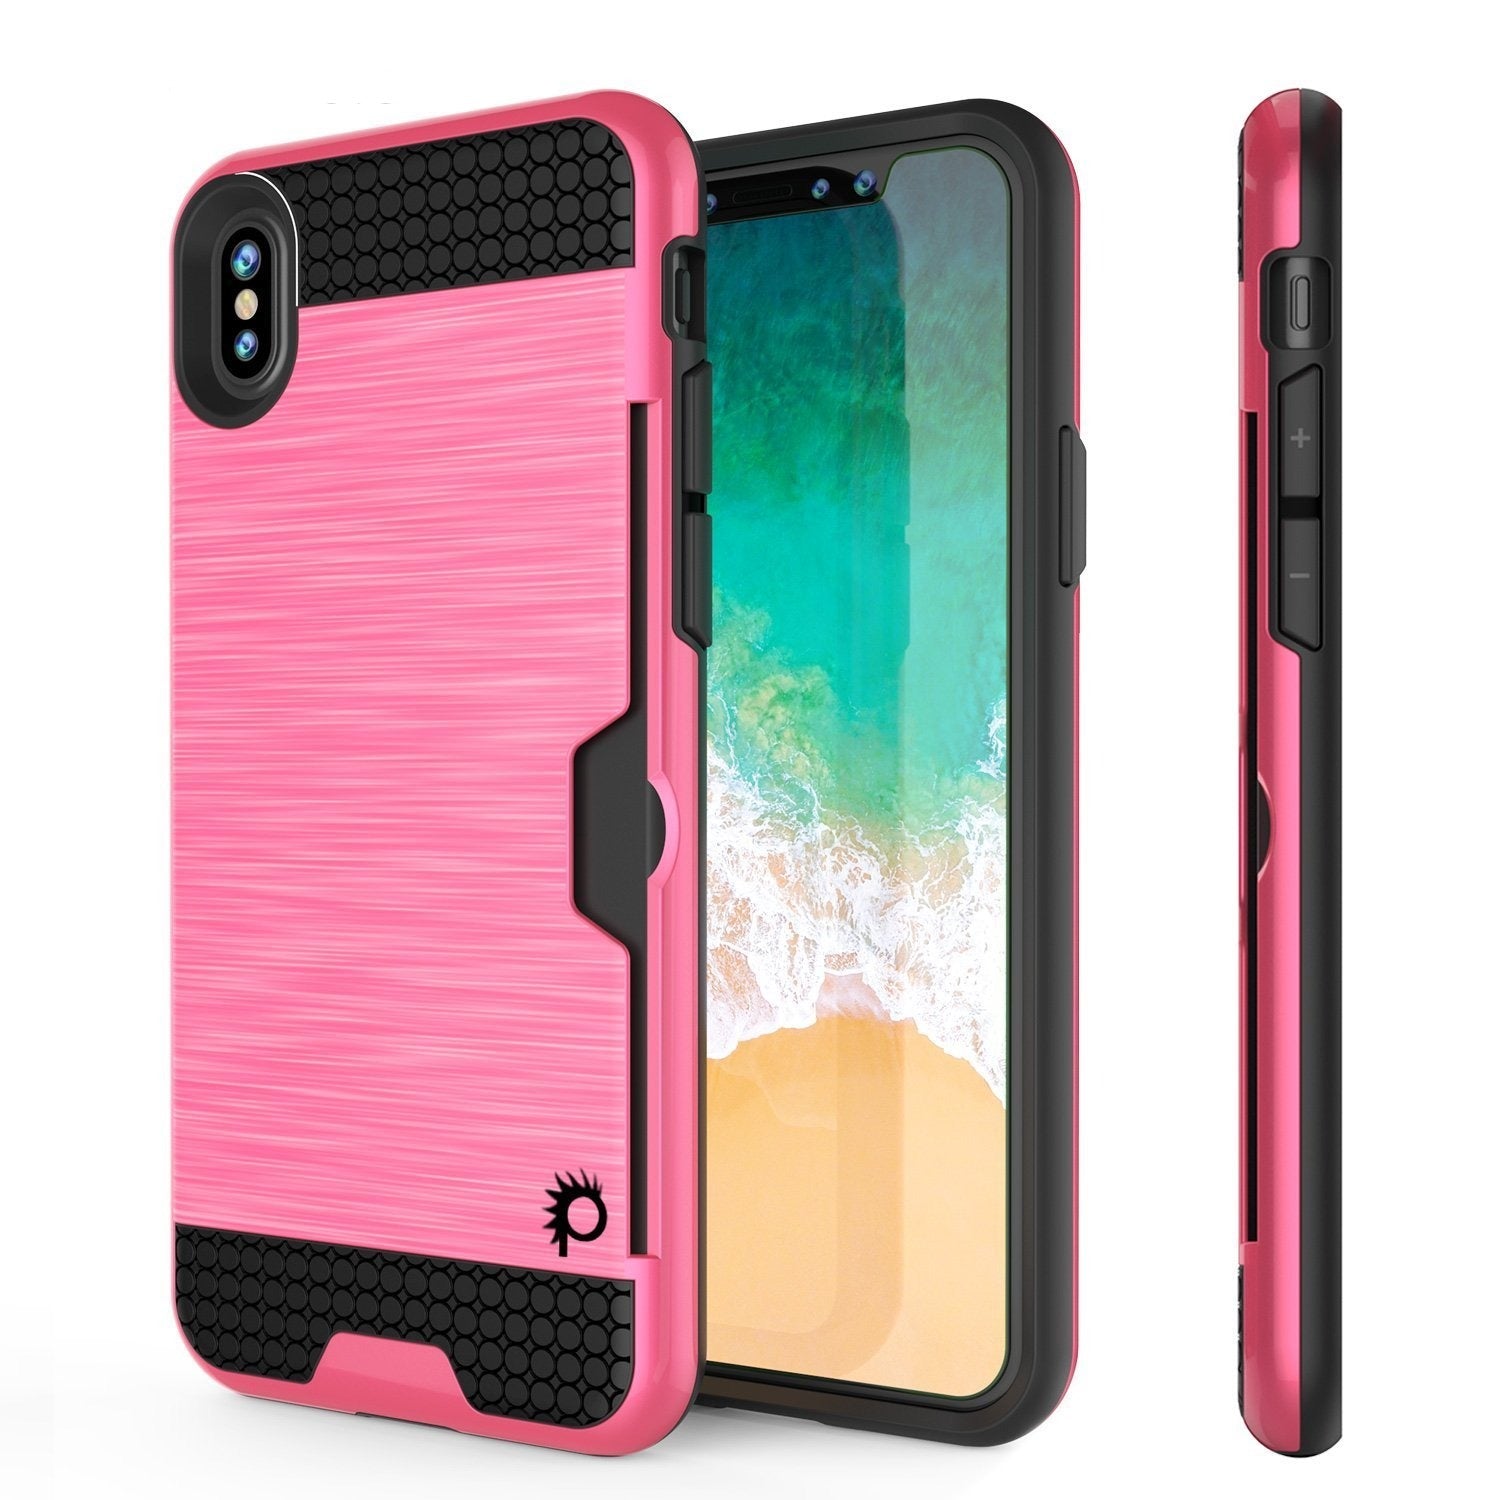 iPhone XS Max Case, PUNKcase [SLOT Series] Slim Fit Dual-Layer Armor Cover [Pink]